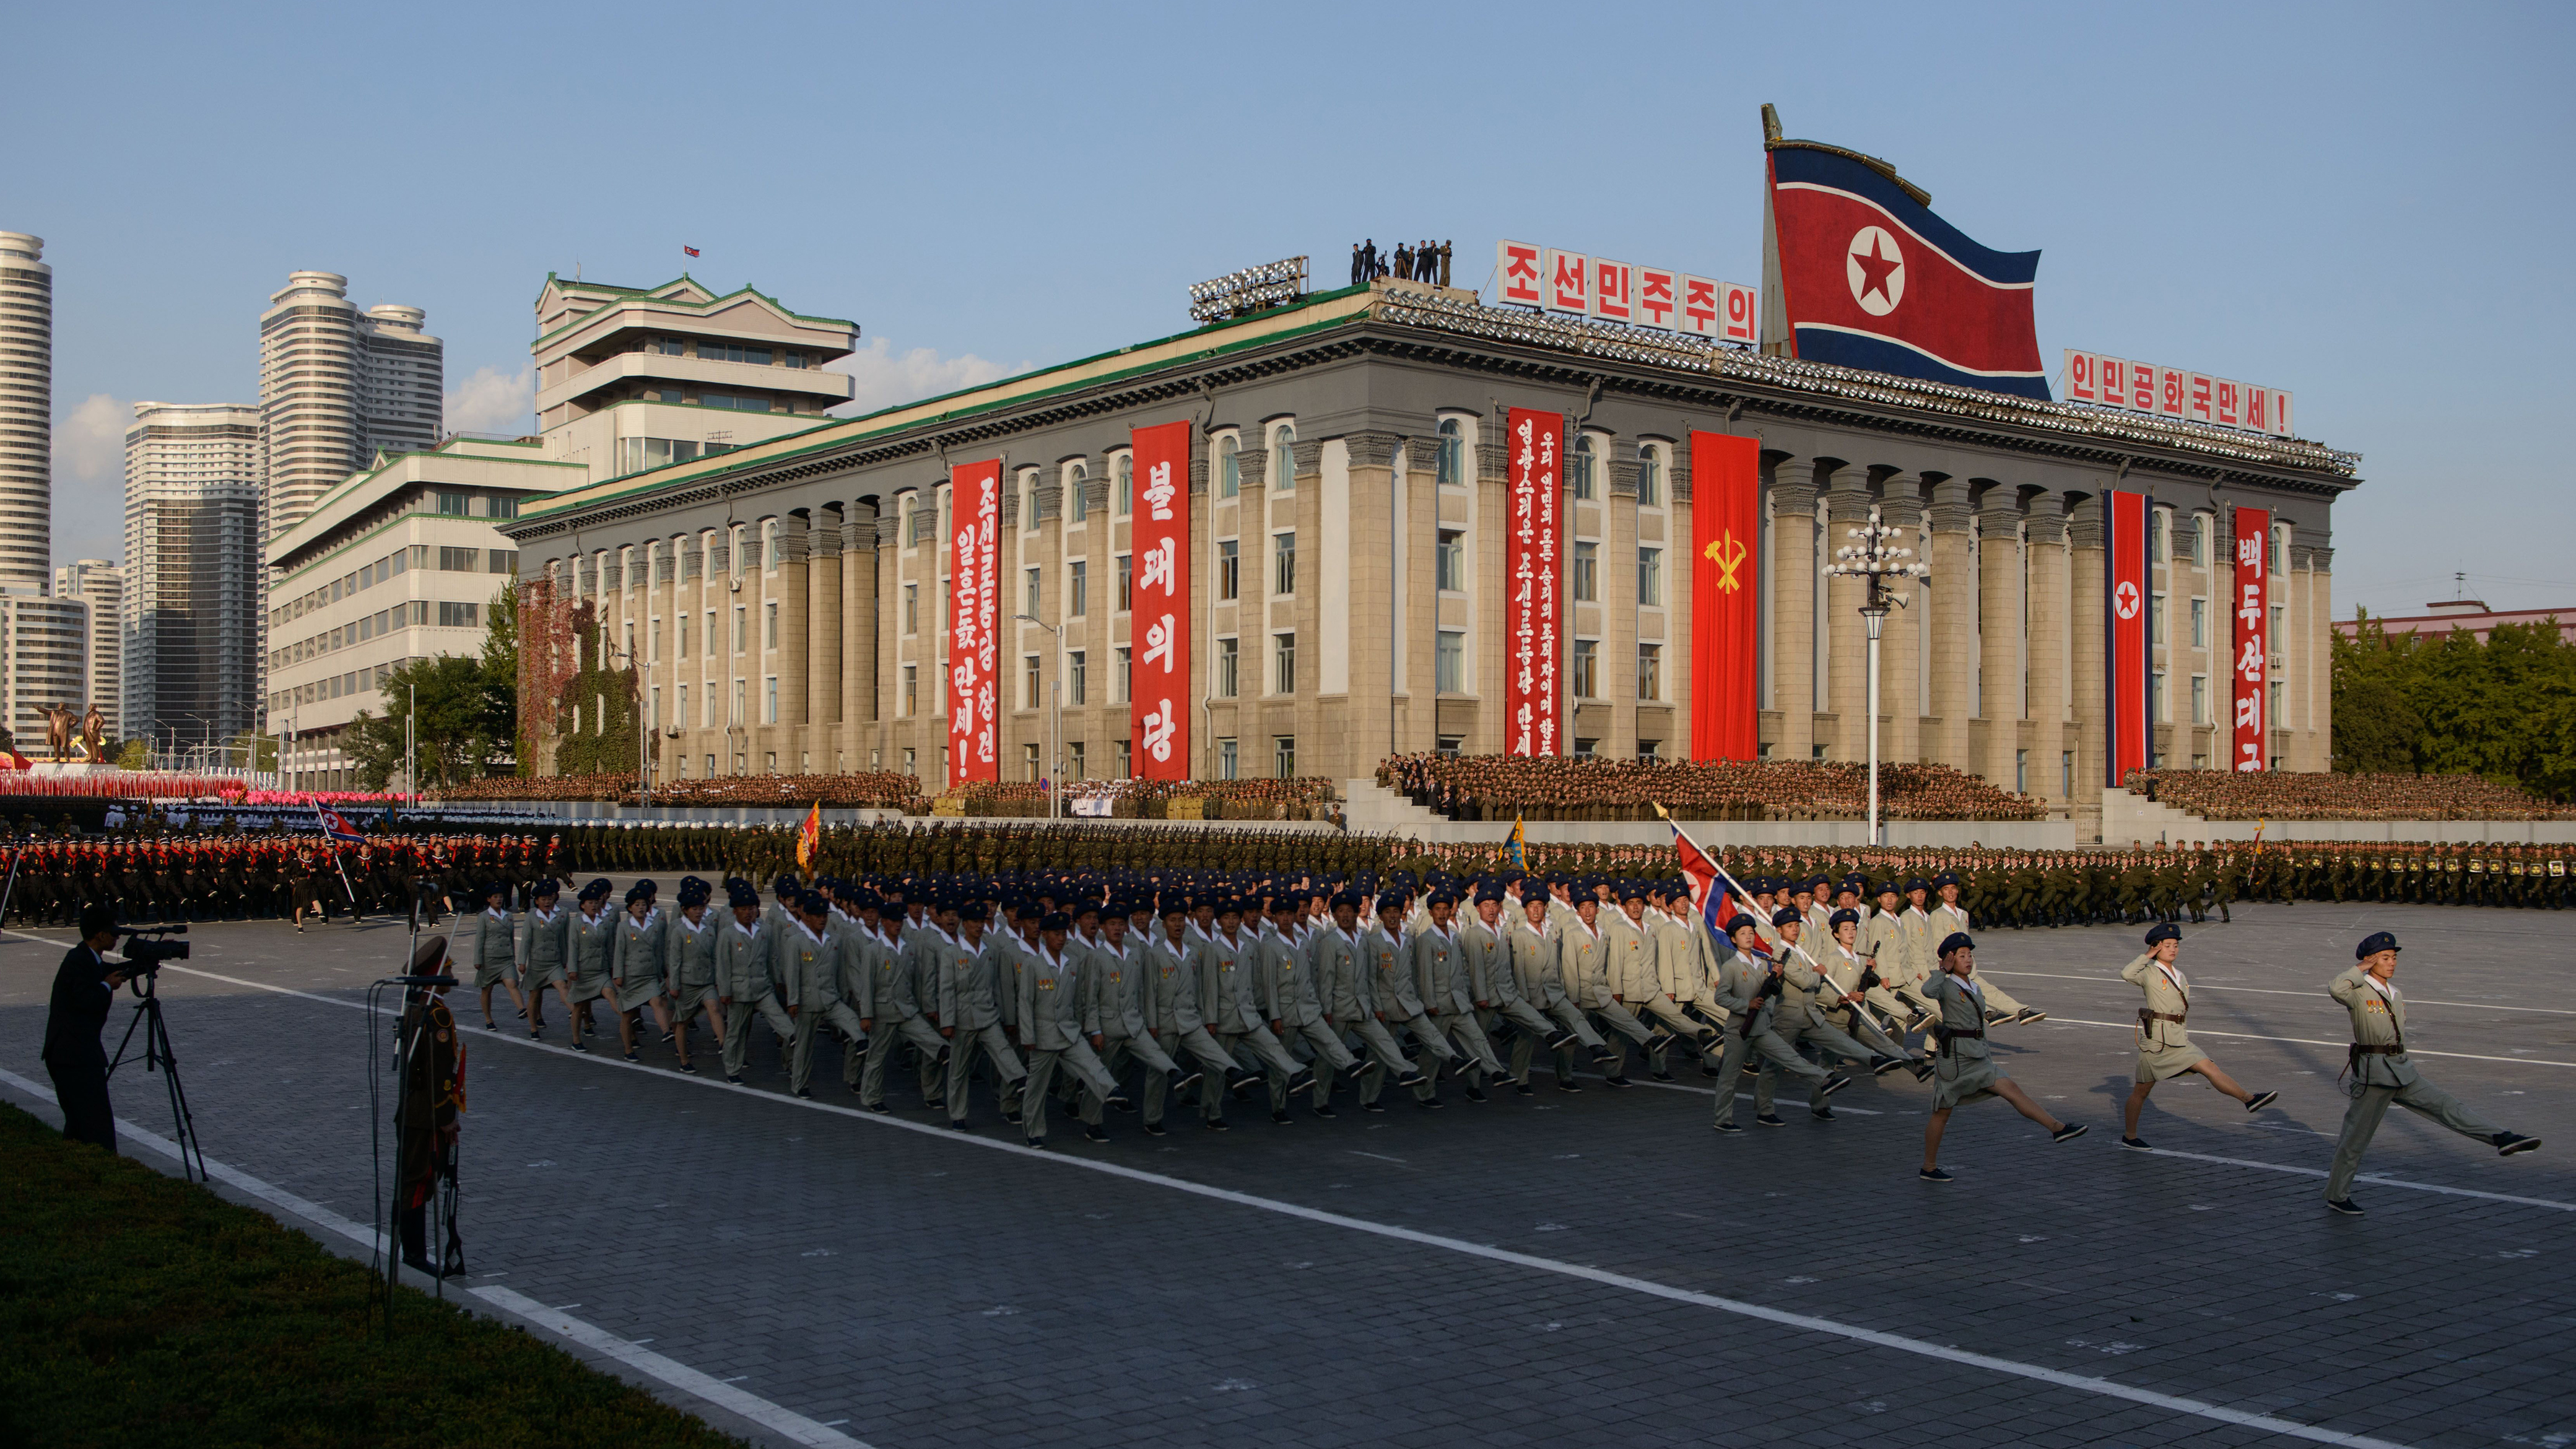 Soldiers march during a mass military parade at Kim Il-Sung square in Pyongyang on October 10, 2015. North Korea was marking the 70th anniversary of its ruling Workers' Party. Photo Credit: ED JONES/AFP/Getty Images.